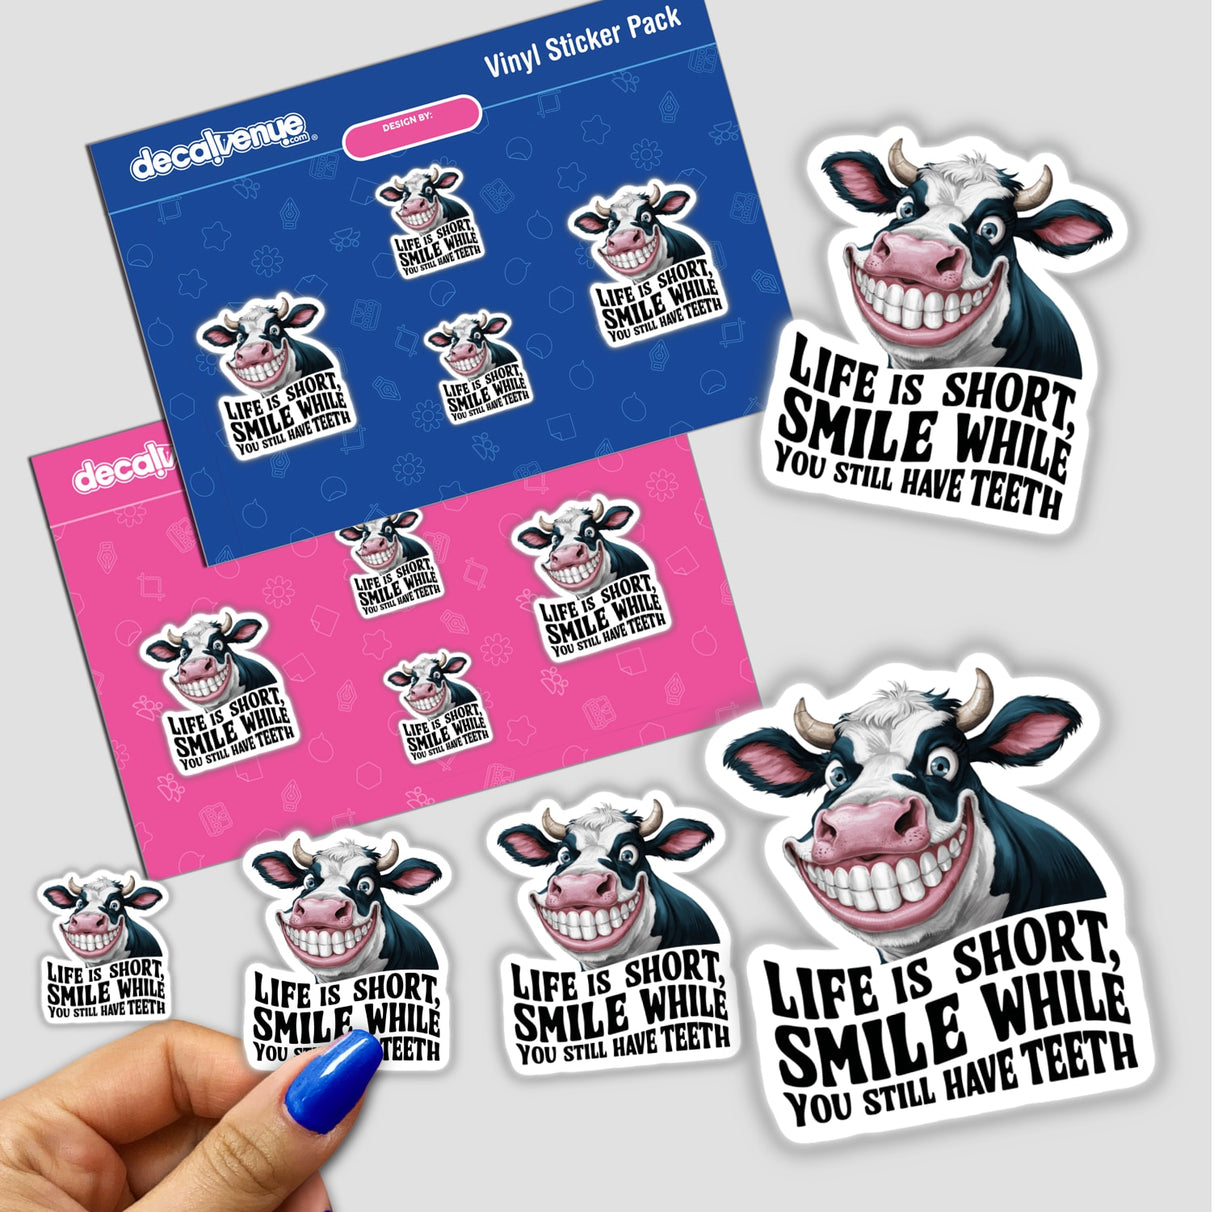 Vibrant cow-themed stickers with humorous, motivational text - "Life is Short. Smile While You Still Have Teeth." Displayed on a Decal Venue product page showcasing the playful, stylized designs.